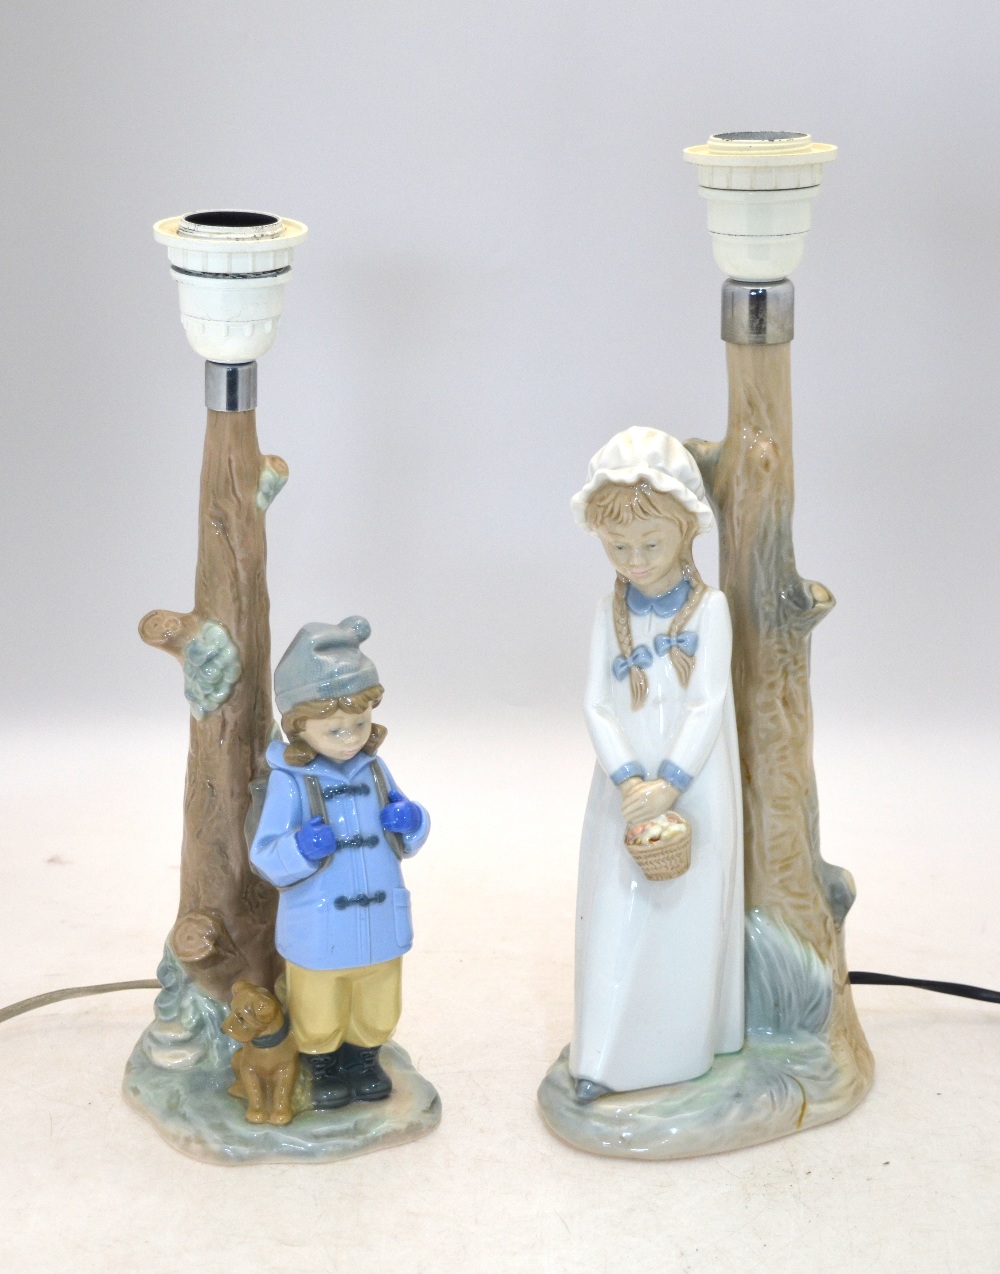 Two Nao lamp bases - one with a girl holding a basket, 30 cm high, the other with a boy in a